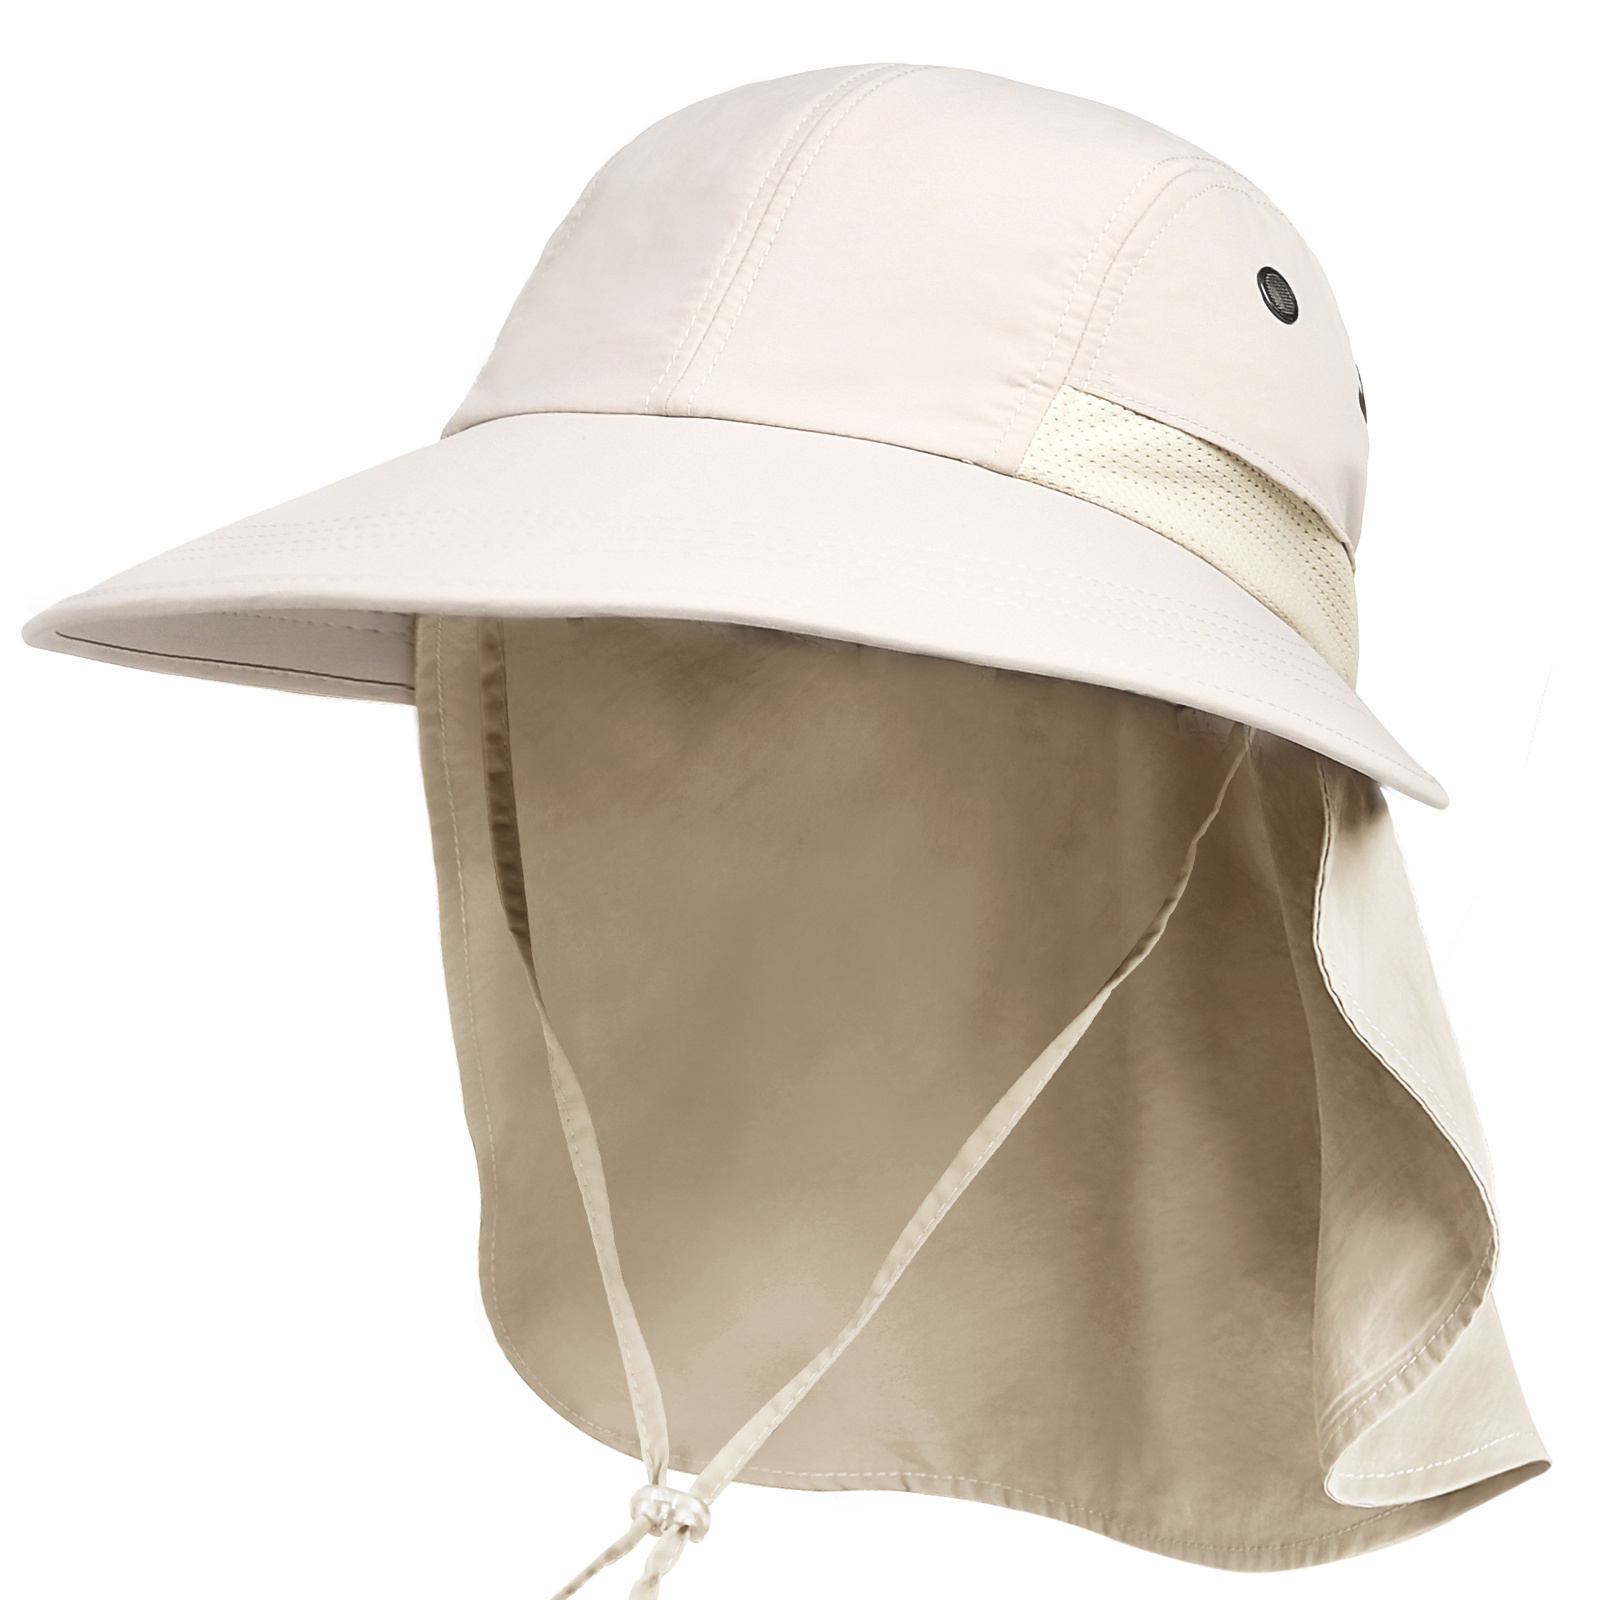 Beige Cool And Handsome Sun Protection Hat, Men's Wide Brim Hiking Neck Flap Outdoor Hats Fishing Hat For Women